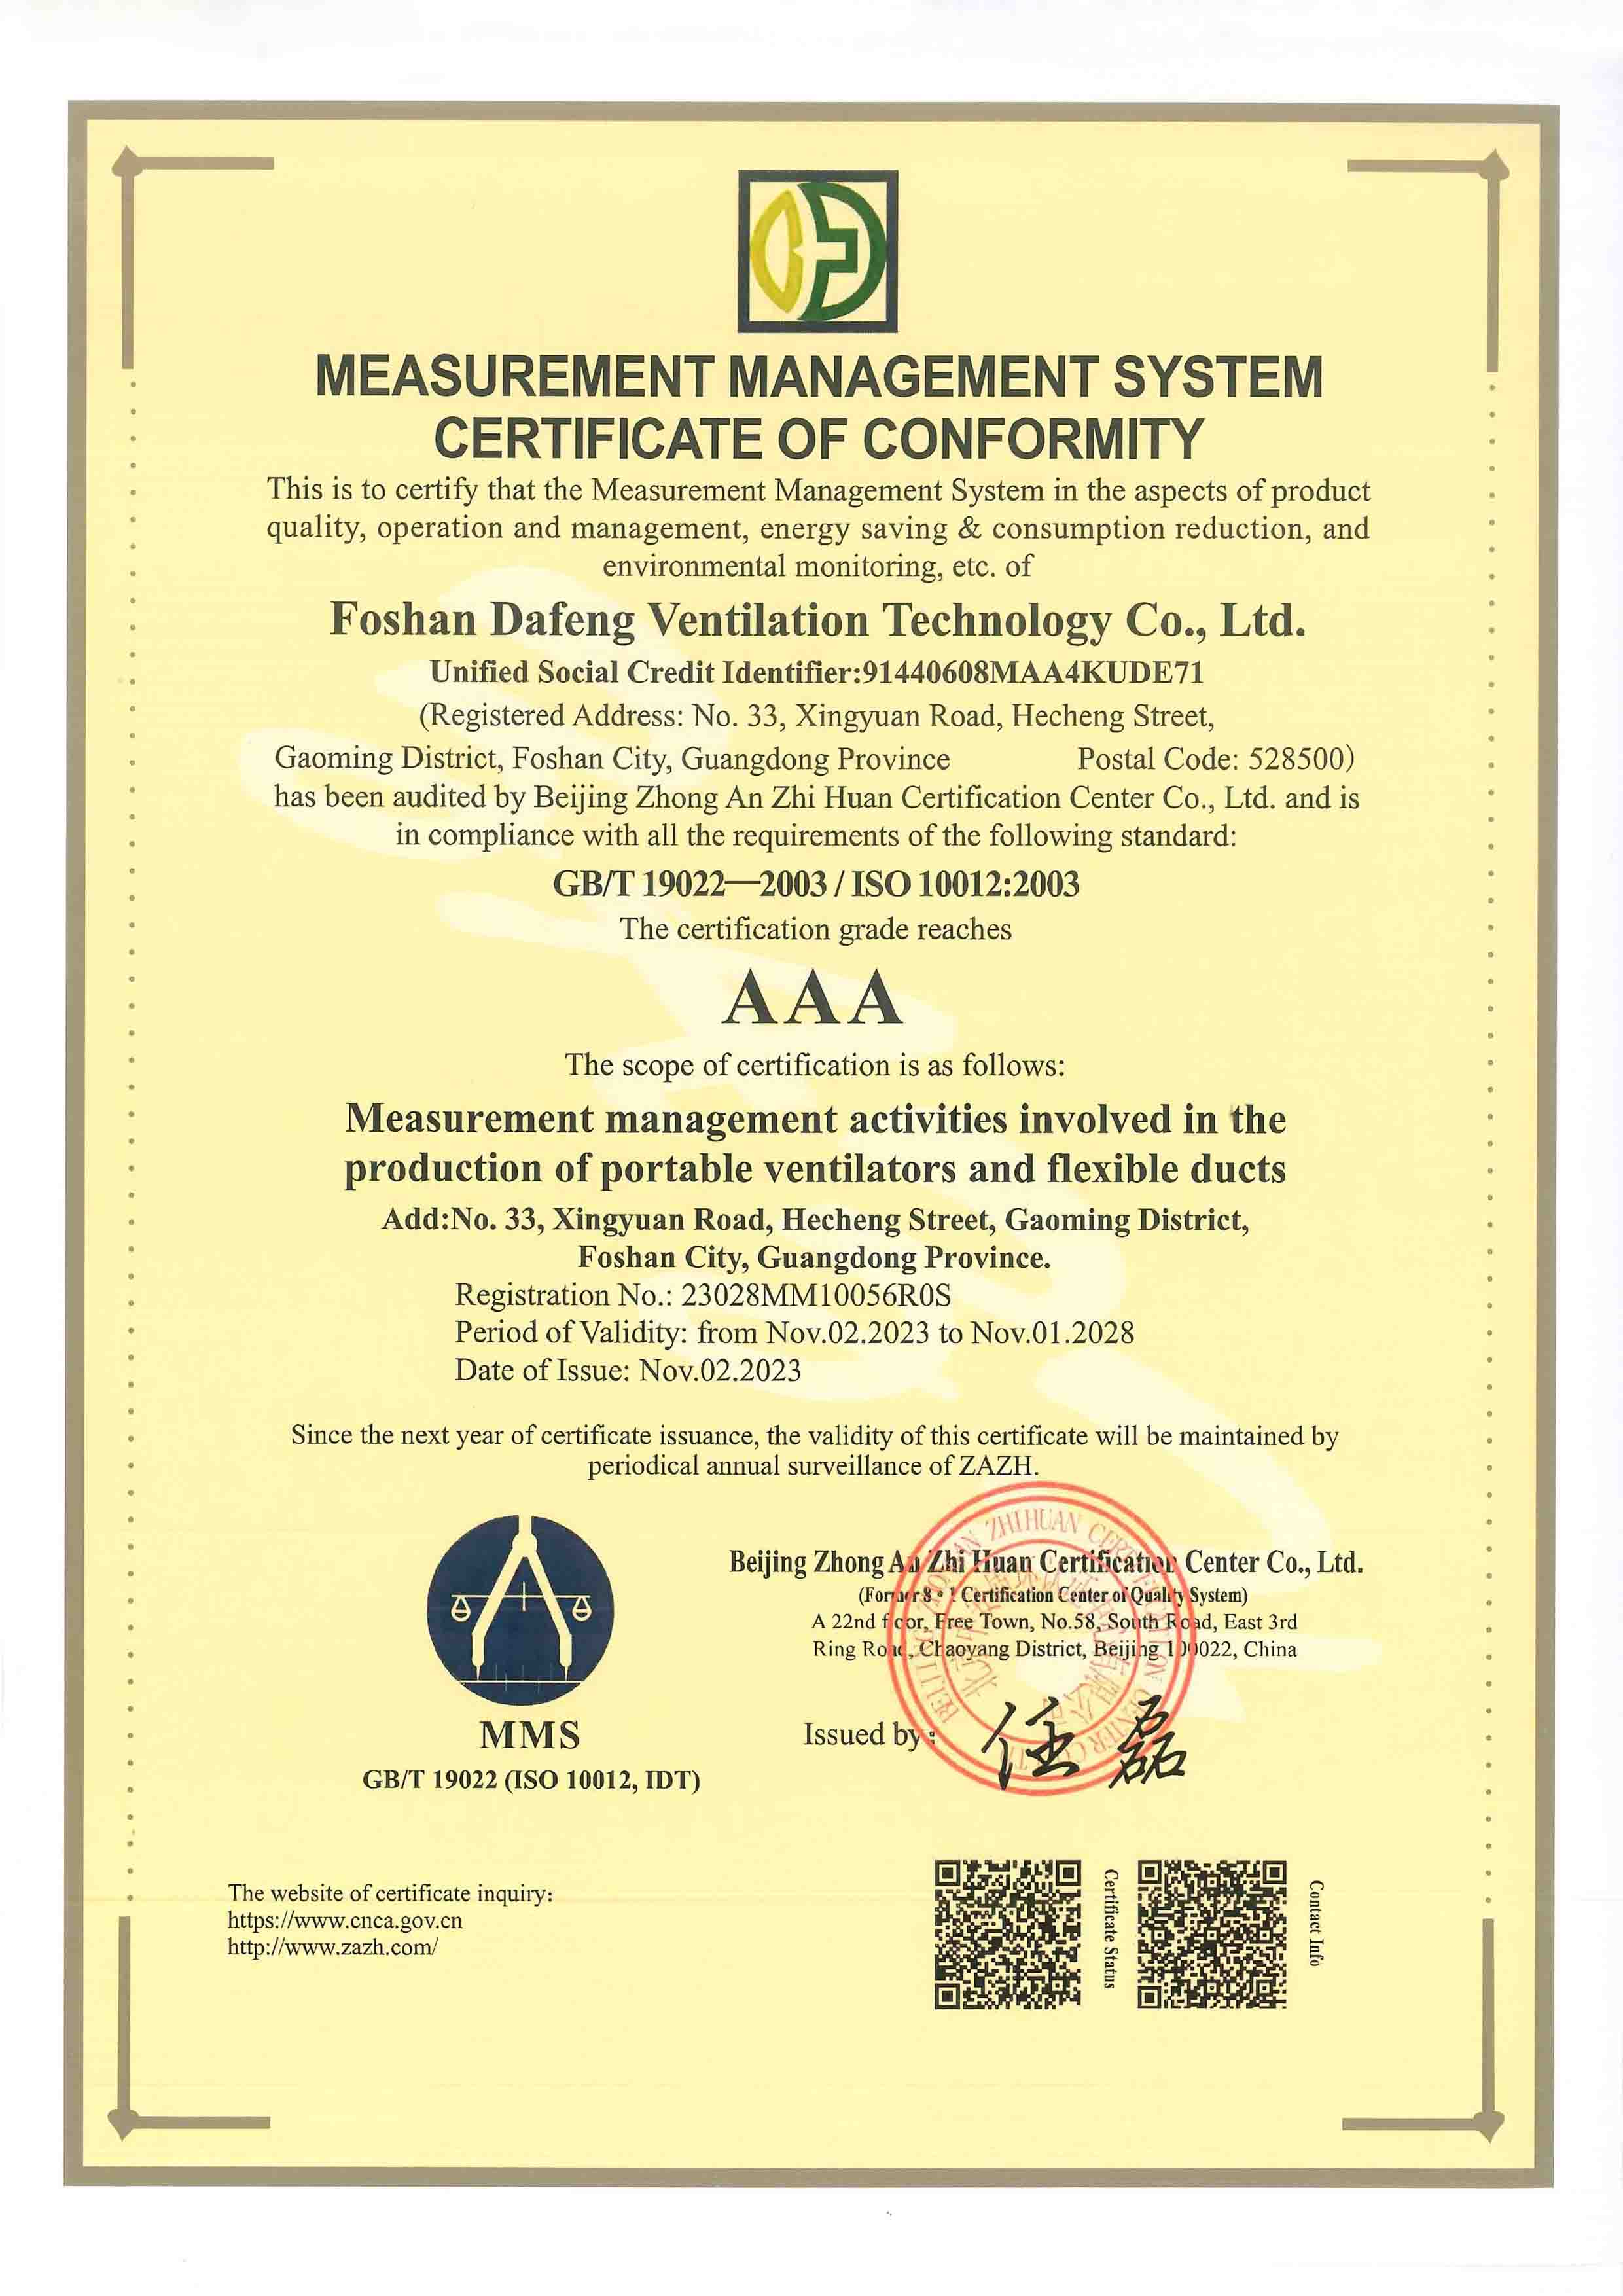 Congratulate our company on passing GB/T 19022-2003 / ISO 10012:2003 measurement management system certification